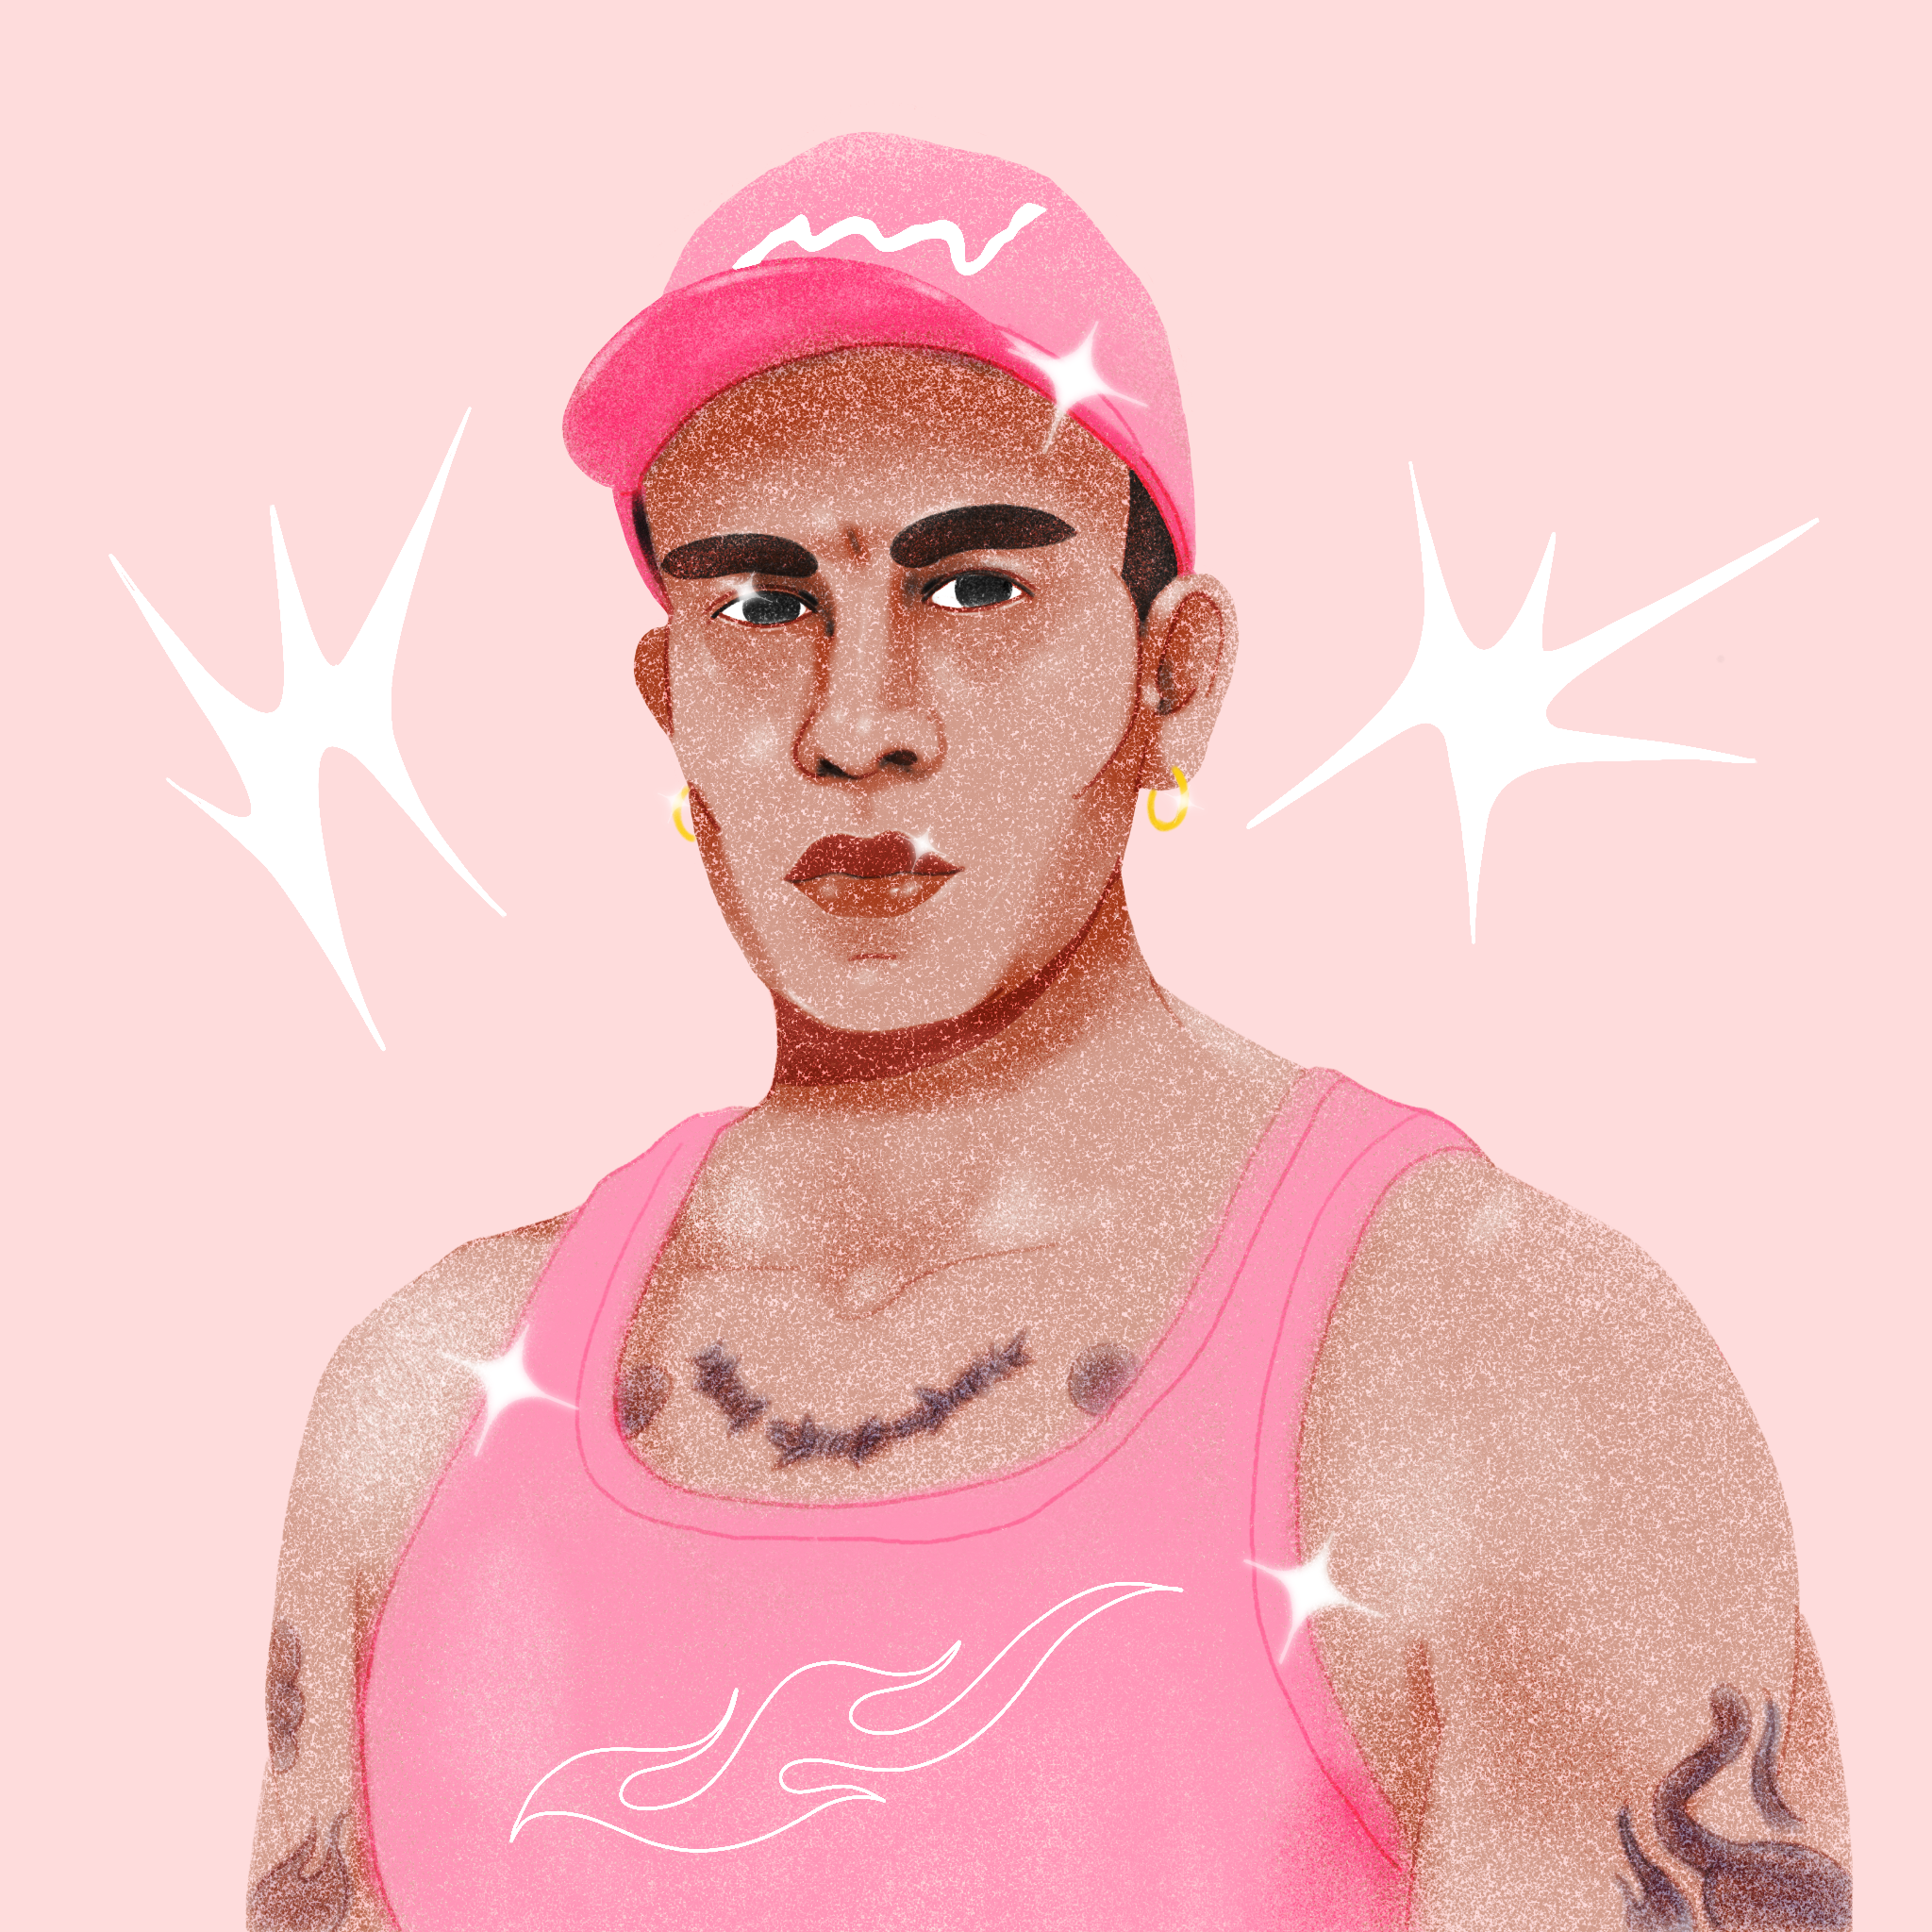 illustrated headshot of a man from the chest up. He has olive skin, short dark brown hair, thick dark brown eyebrows, and dark brown eyes. He is wearing a pink ball cap, two gold hoop earrings, and a pink tank top with a drawing of a flame on it. He has tattoos on his arms and chest. The background is pink and there are several white sparkles throughout the photo.